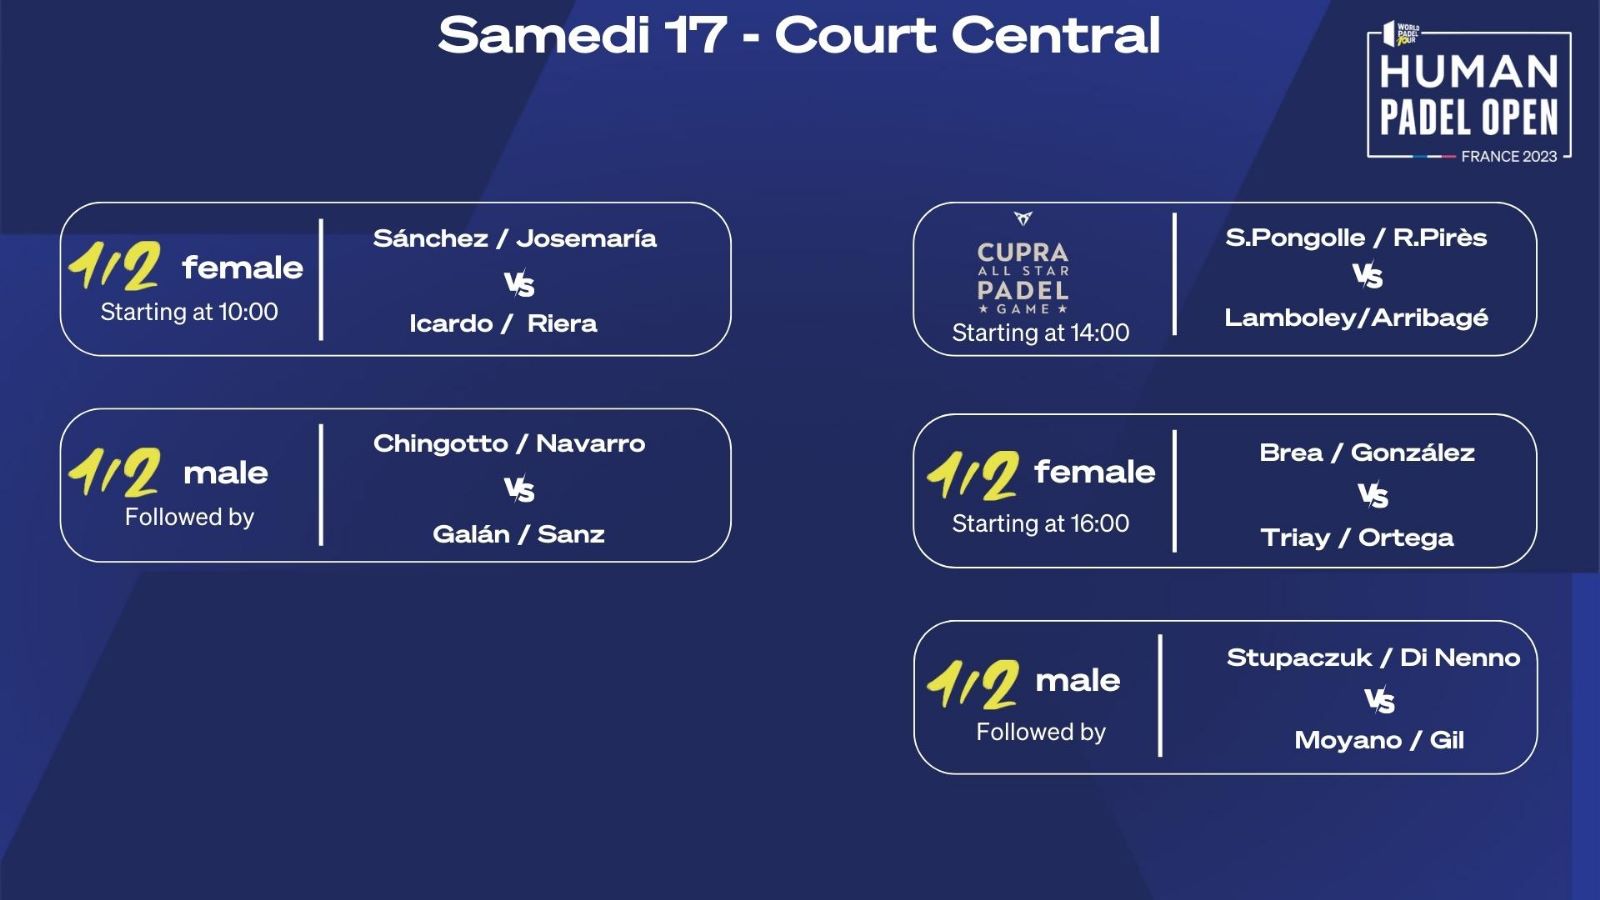 Finale court central Human Padel Open